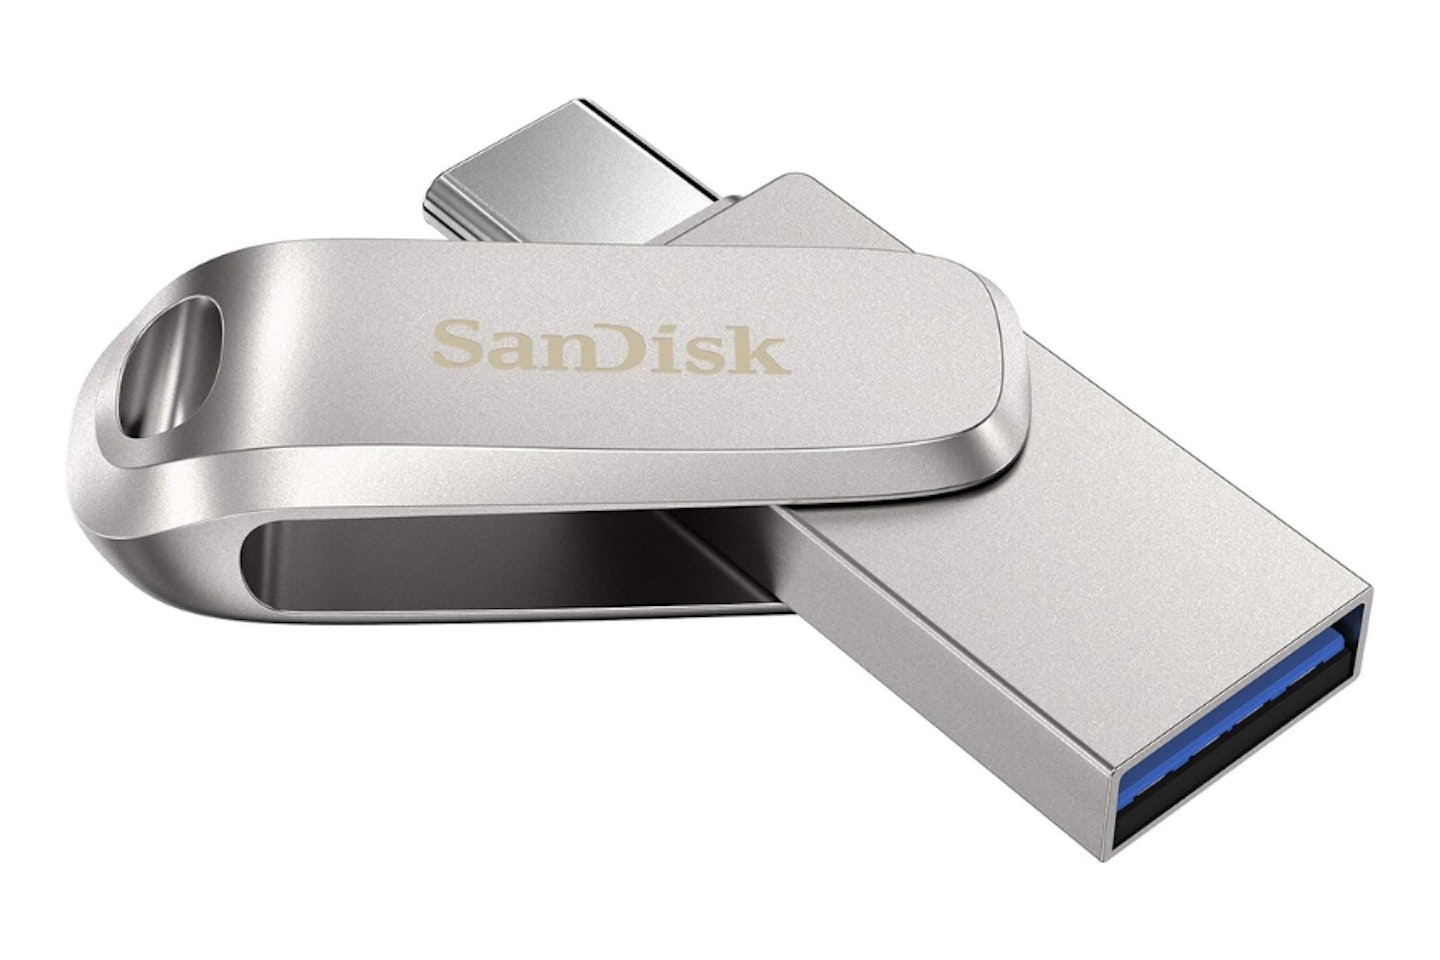 SanDisk 1TB Ultra Dual Drive Luxe USB Type-C Flash Drive - one of the best SanDisk USB stick devices